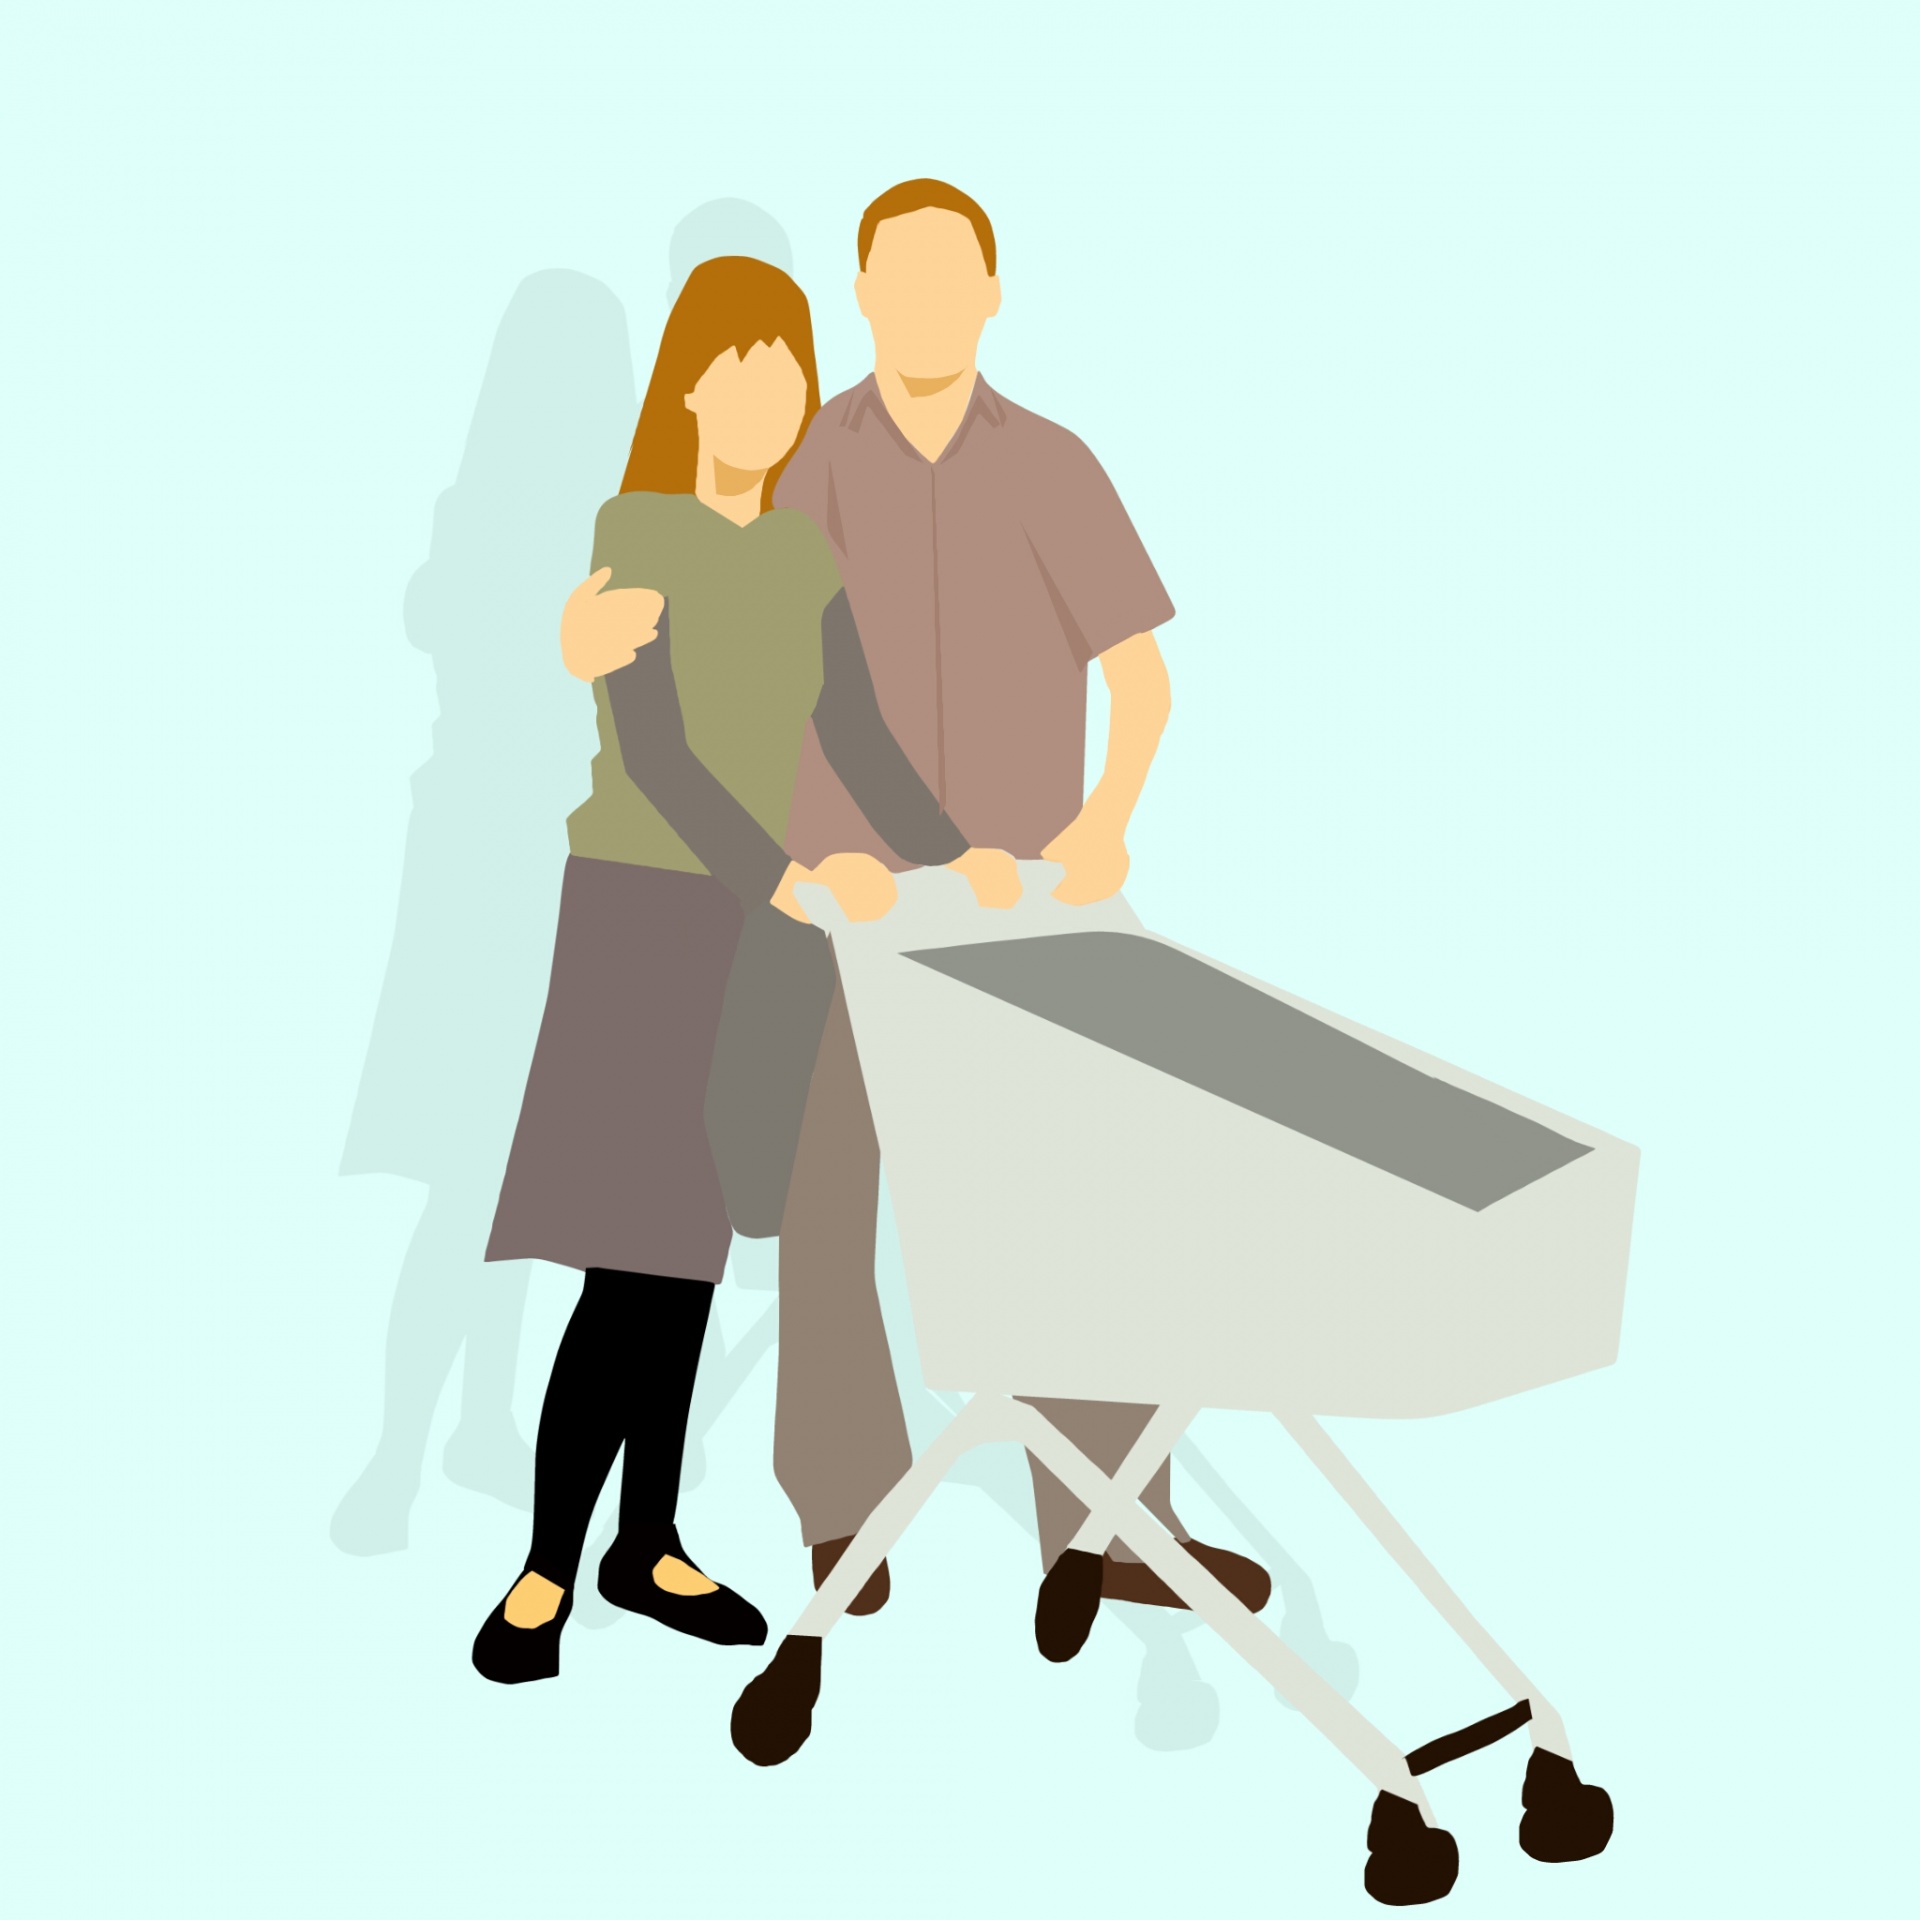 cart, couple, shopping, young, , girl, happiness, object, store ,men ,buy ,laughing ,casua,l , full ,people ,trolley ,pushcart, retail, sitting, purchasing ,supermarket ,buying ,trade, standing, laugh, enjoyment ,togetherness, body, fun ,trolley